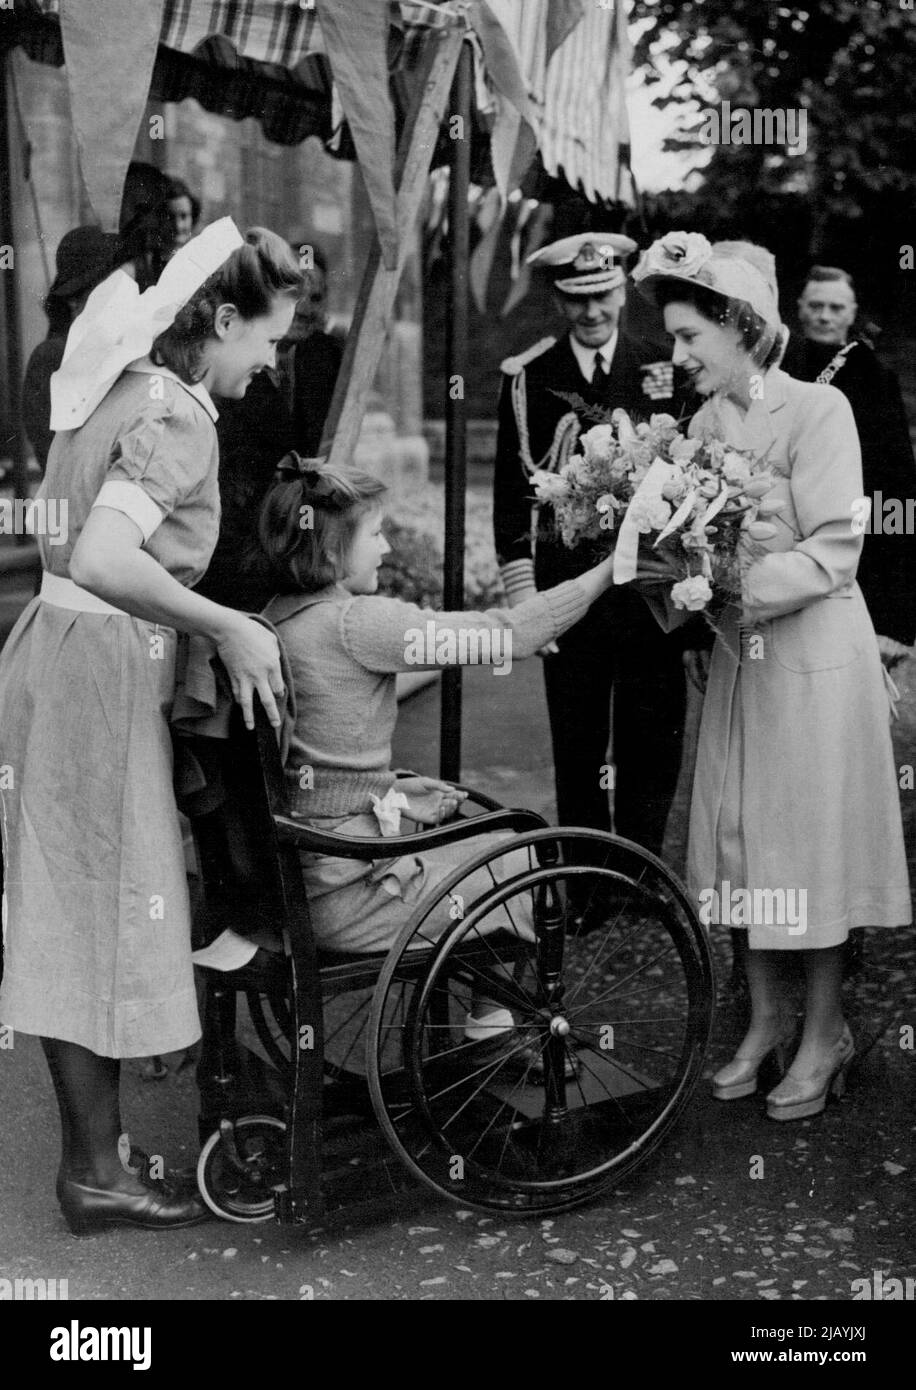 The 'Patron goes to Bath - Princess Margaret, wearing a charming spring hat and high platform shoes, receiving a bouquet from thirteen-year-old Joan Davidge, a patient at bath Orthopedic Hospital. Thousands lined the streets of Bath today to welcome Princess Margaret on her first visit to the city. A police cordon was broken at the Guildhall and hundreds rushed forward to her car. The Princess was there as patron of the Bath Assembly which closed today. May 01, 1948. Stock Photo